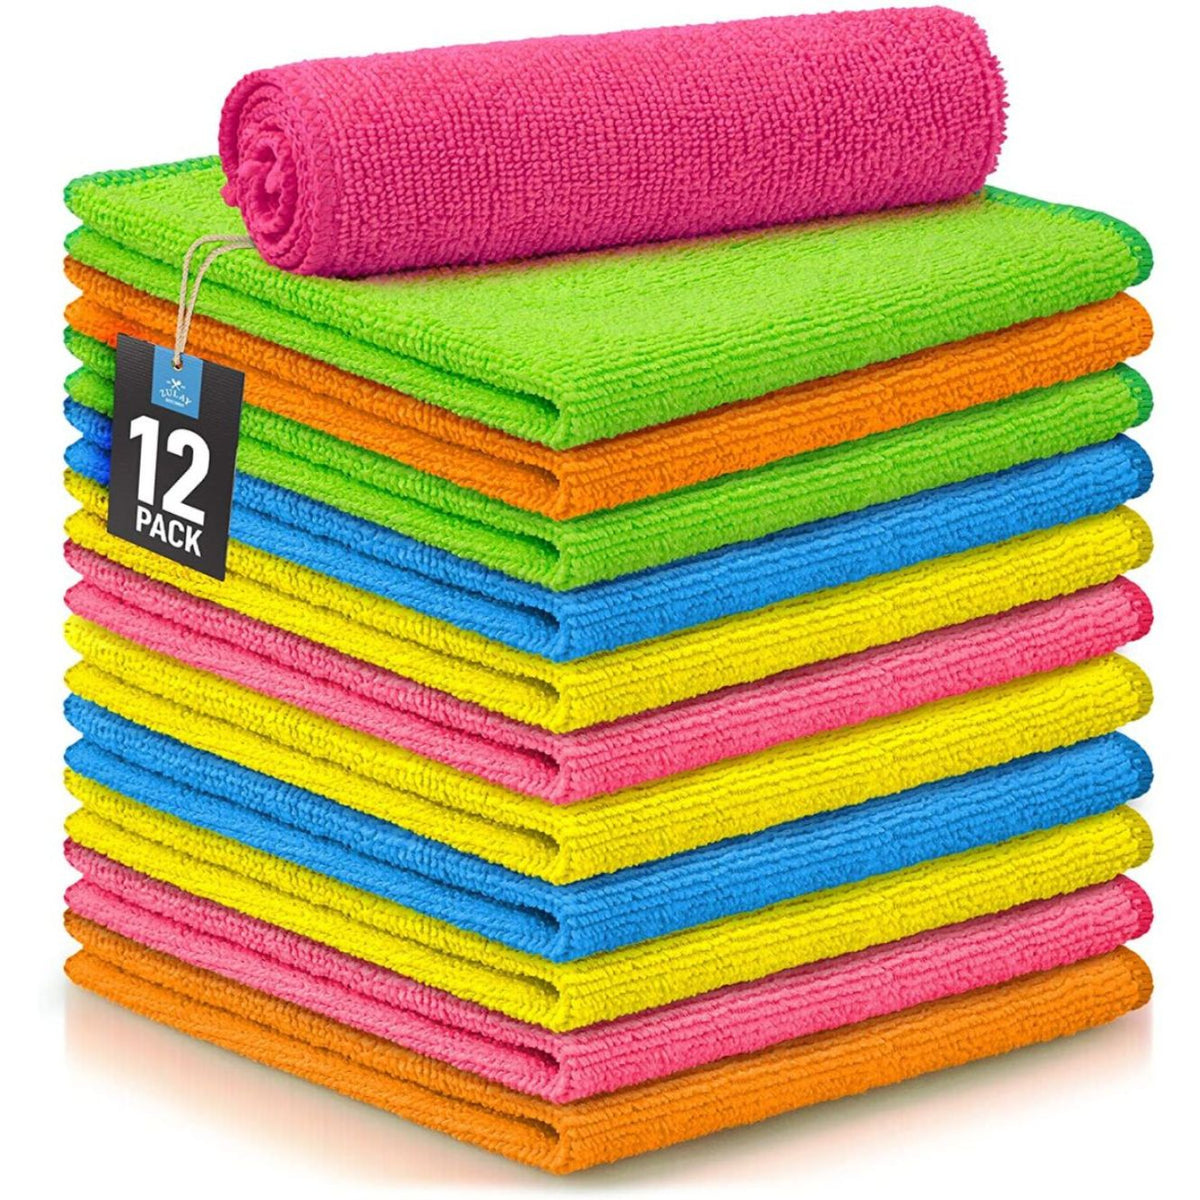  MAVGV Microfiber Cleaning Cloth - 12 Pack Kitchen Towels -  Double-Sided Microfiber Towel Lint Free Highly Absorbent Multi-Purpose Dust  and Dirty Cleaning Supplies for Kitchen Car Cleaning : Health & Household